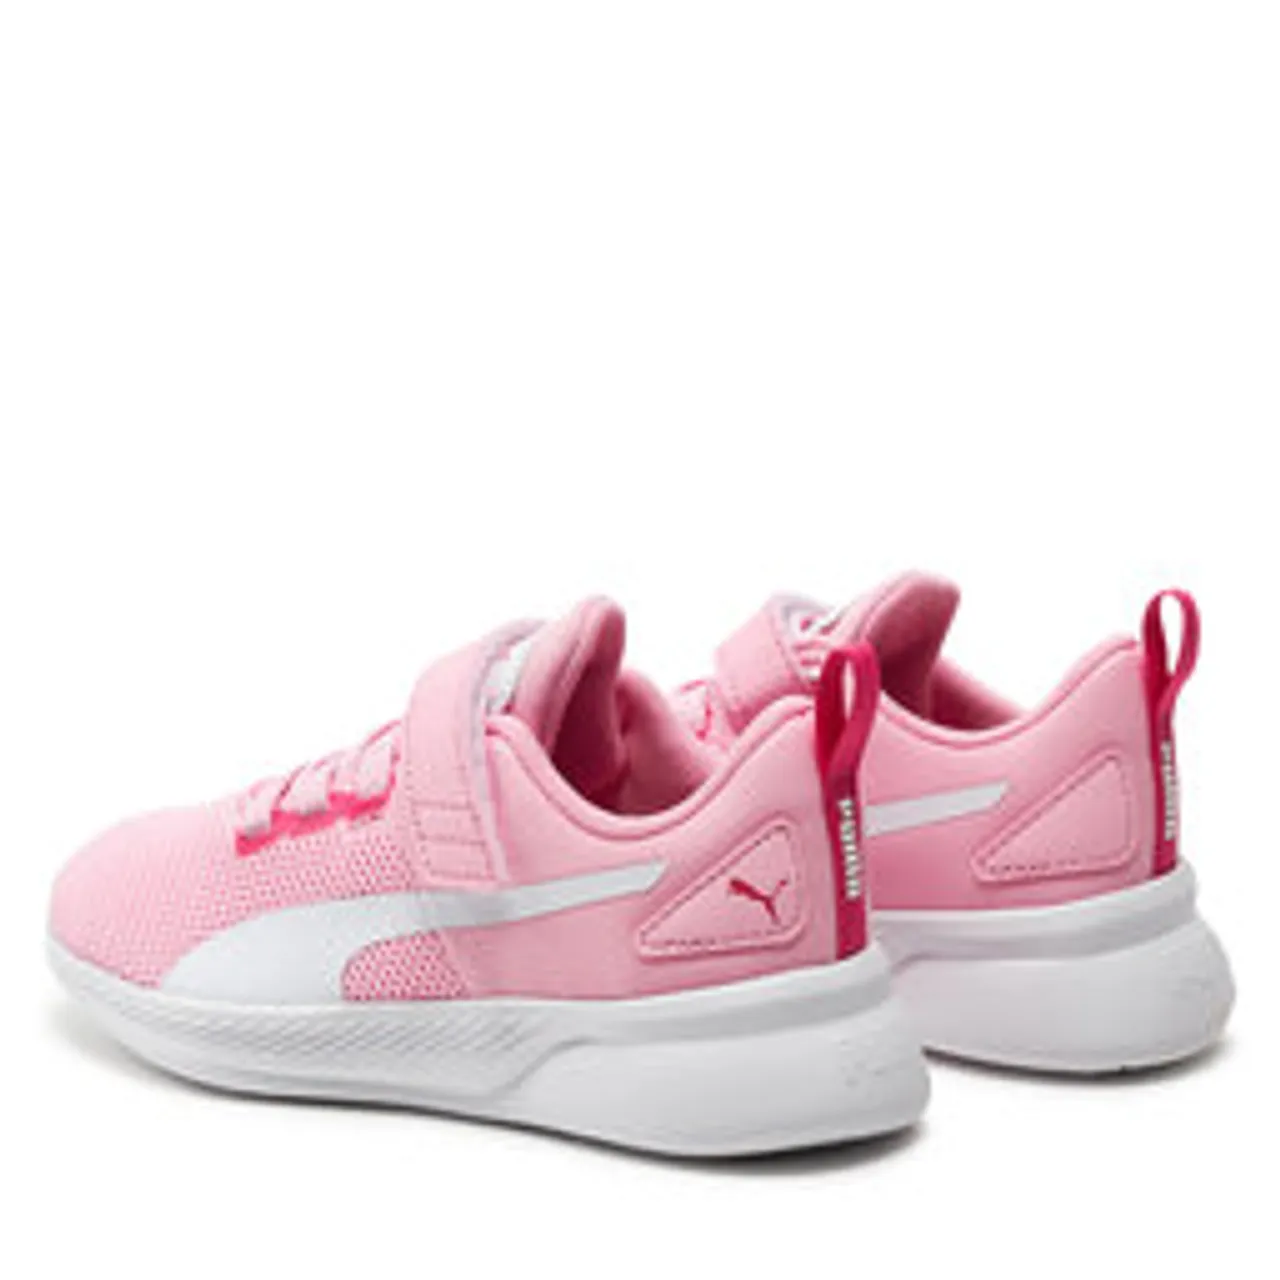 Sneakers Puma Flyer Runner V PS 192929 46 Pink Lilac-PUMA White-PUMA Pink